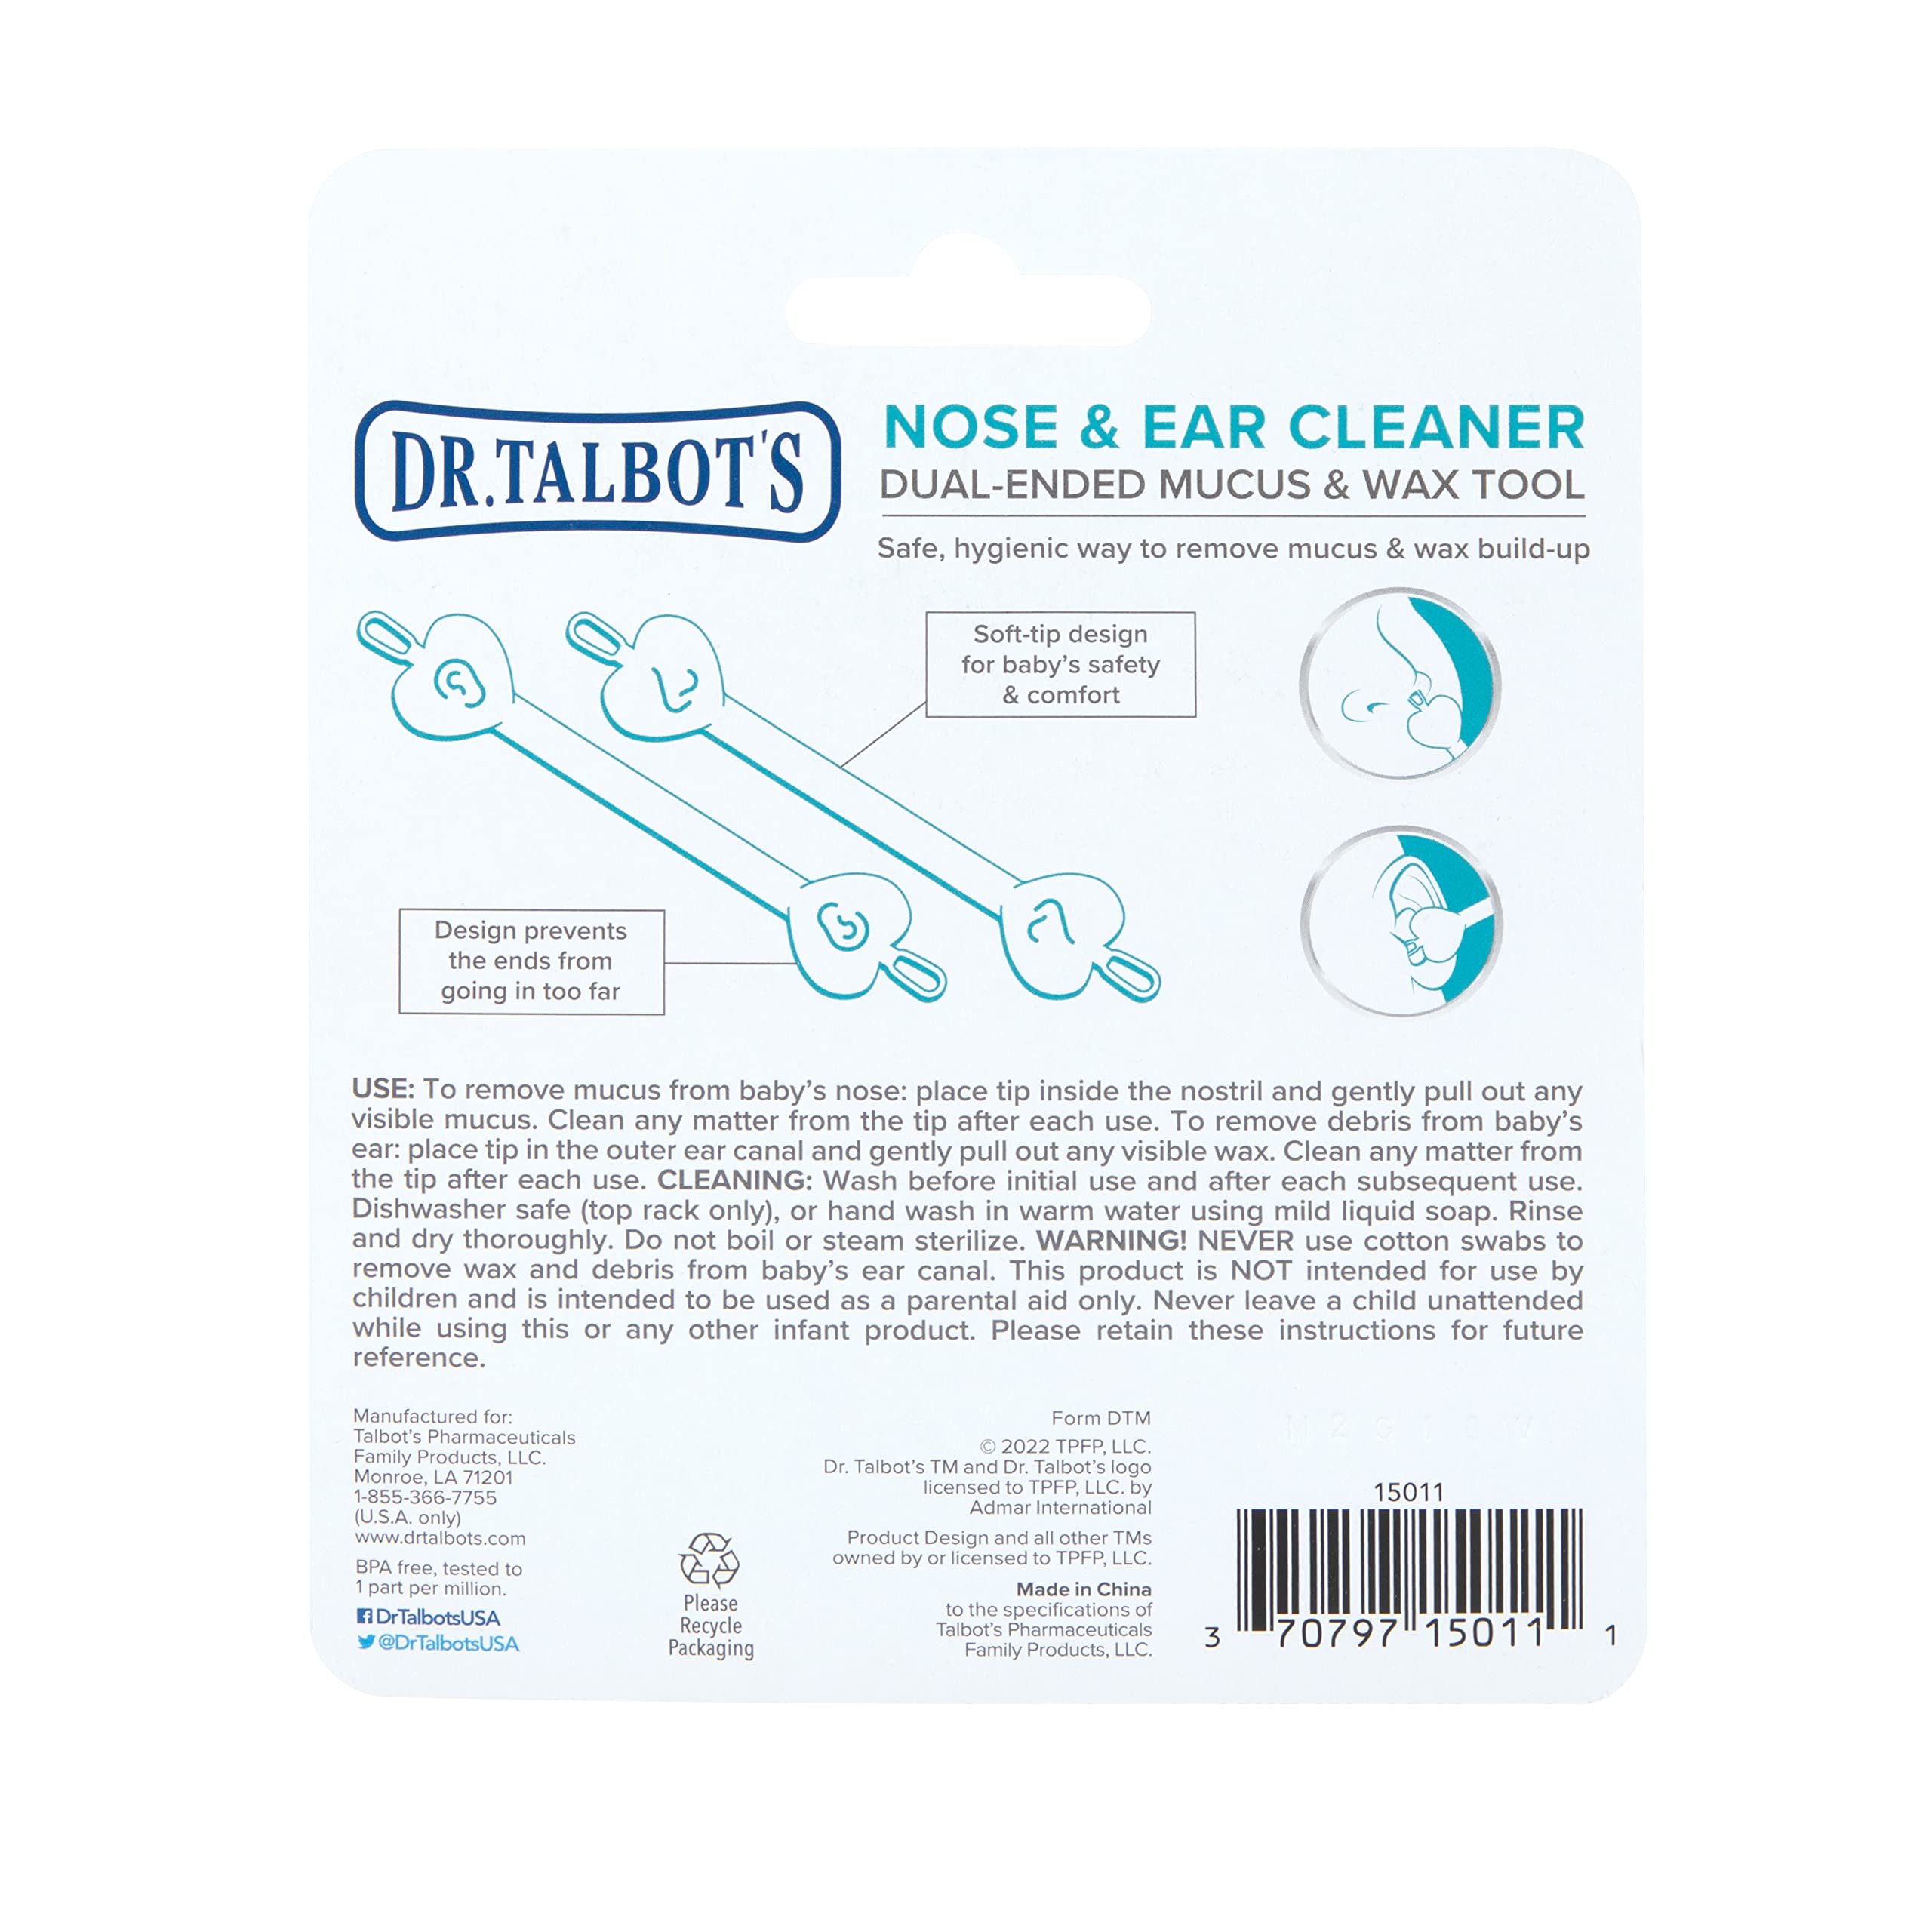 Dr. Talbot's Safe Ear Wax Removal Tool and Nose Cleaner for Baby - BPA Free with Travel Case - 2-Pack - Girl